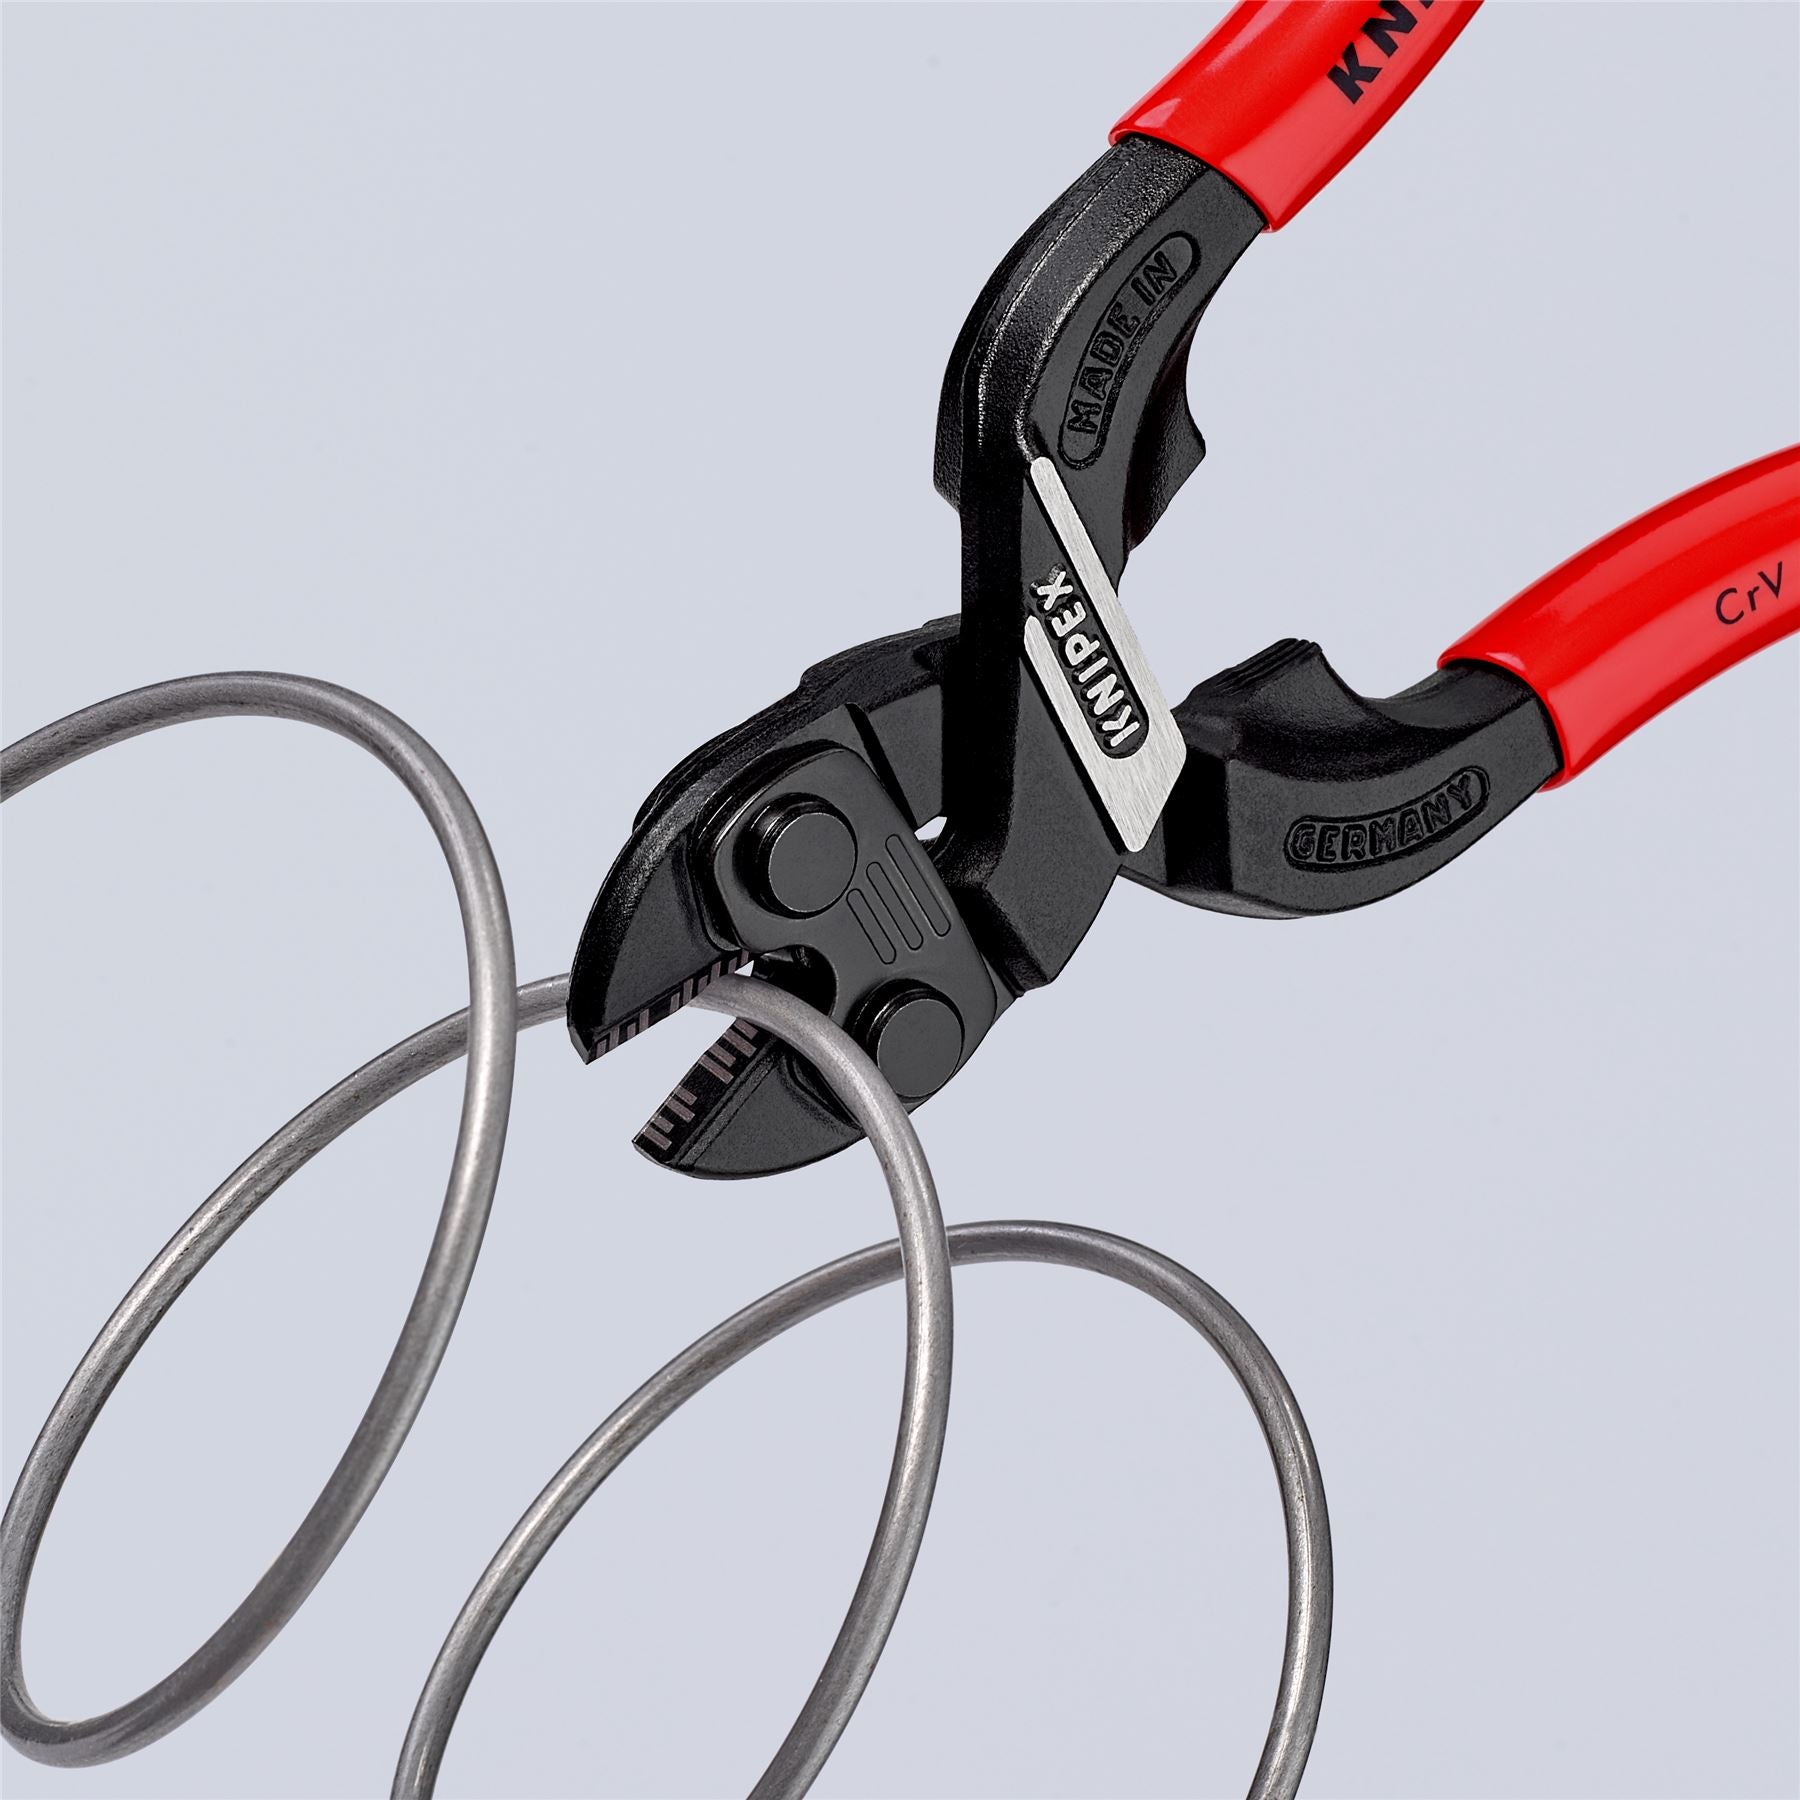 KNIPEX Compact Bolt Cutters CoBolt S Pliers with Cutting Edge Recess 160mm Plastic Coated 71 01 160 SB